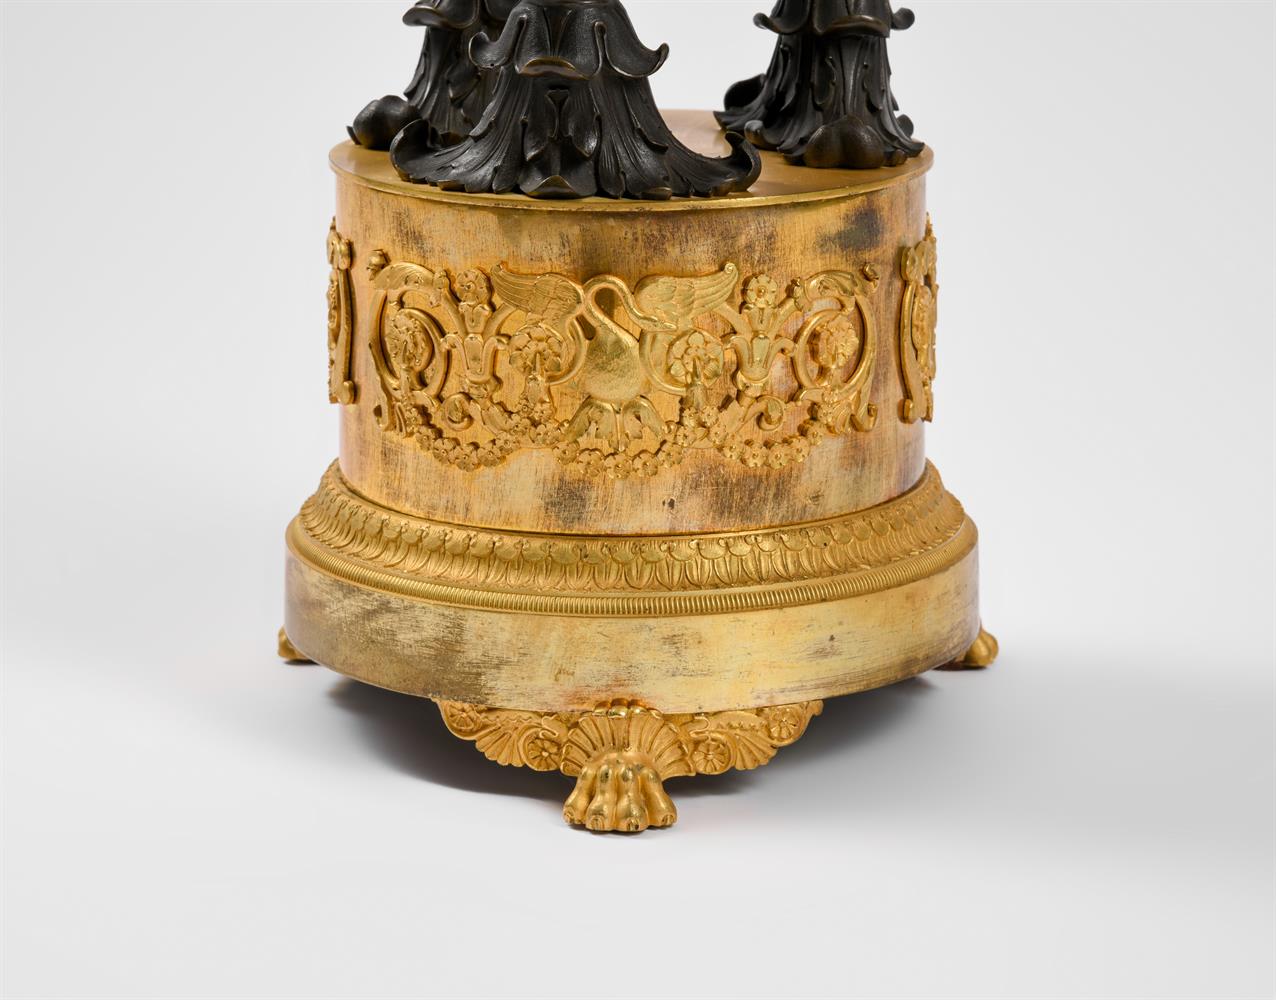 A FRENCH PATINATED AND GILT BRONZE TABLE CENTREPIECE, MID 19TH CENTURY - Image 6 of 7